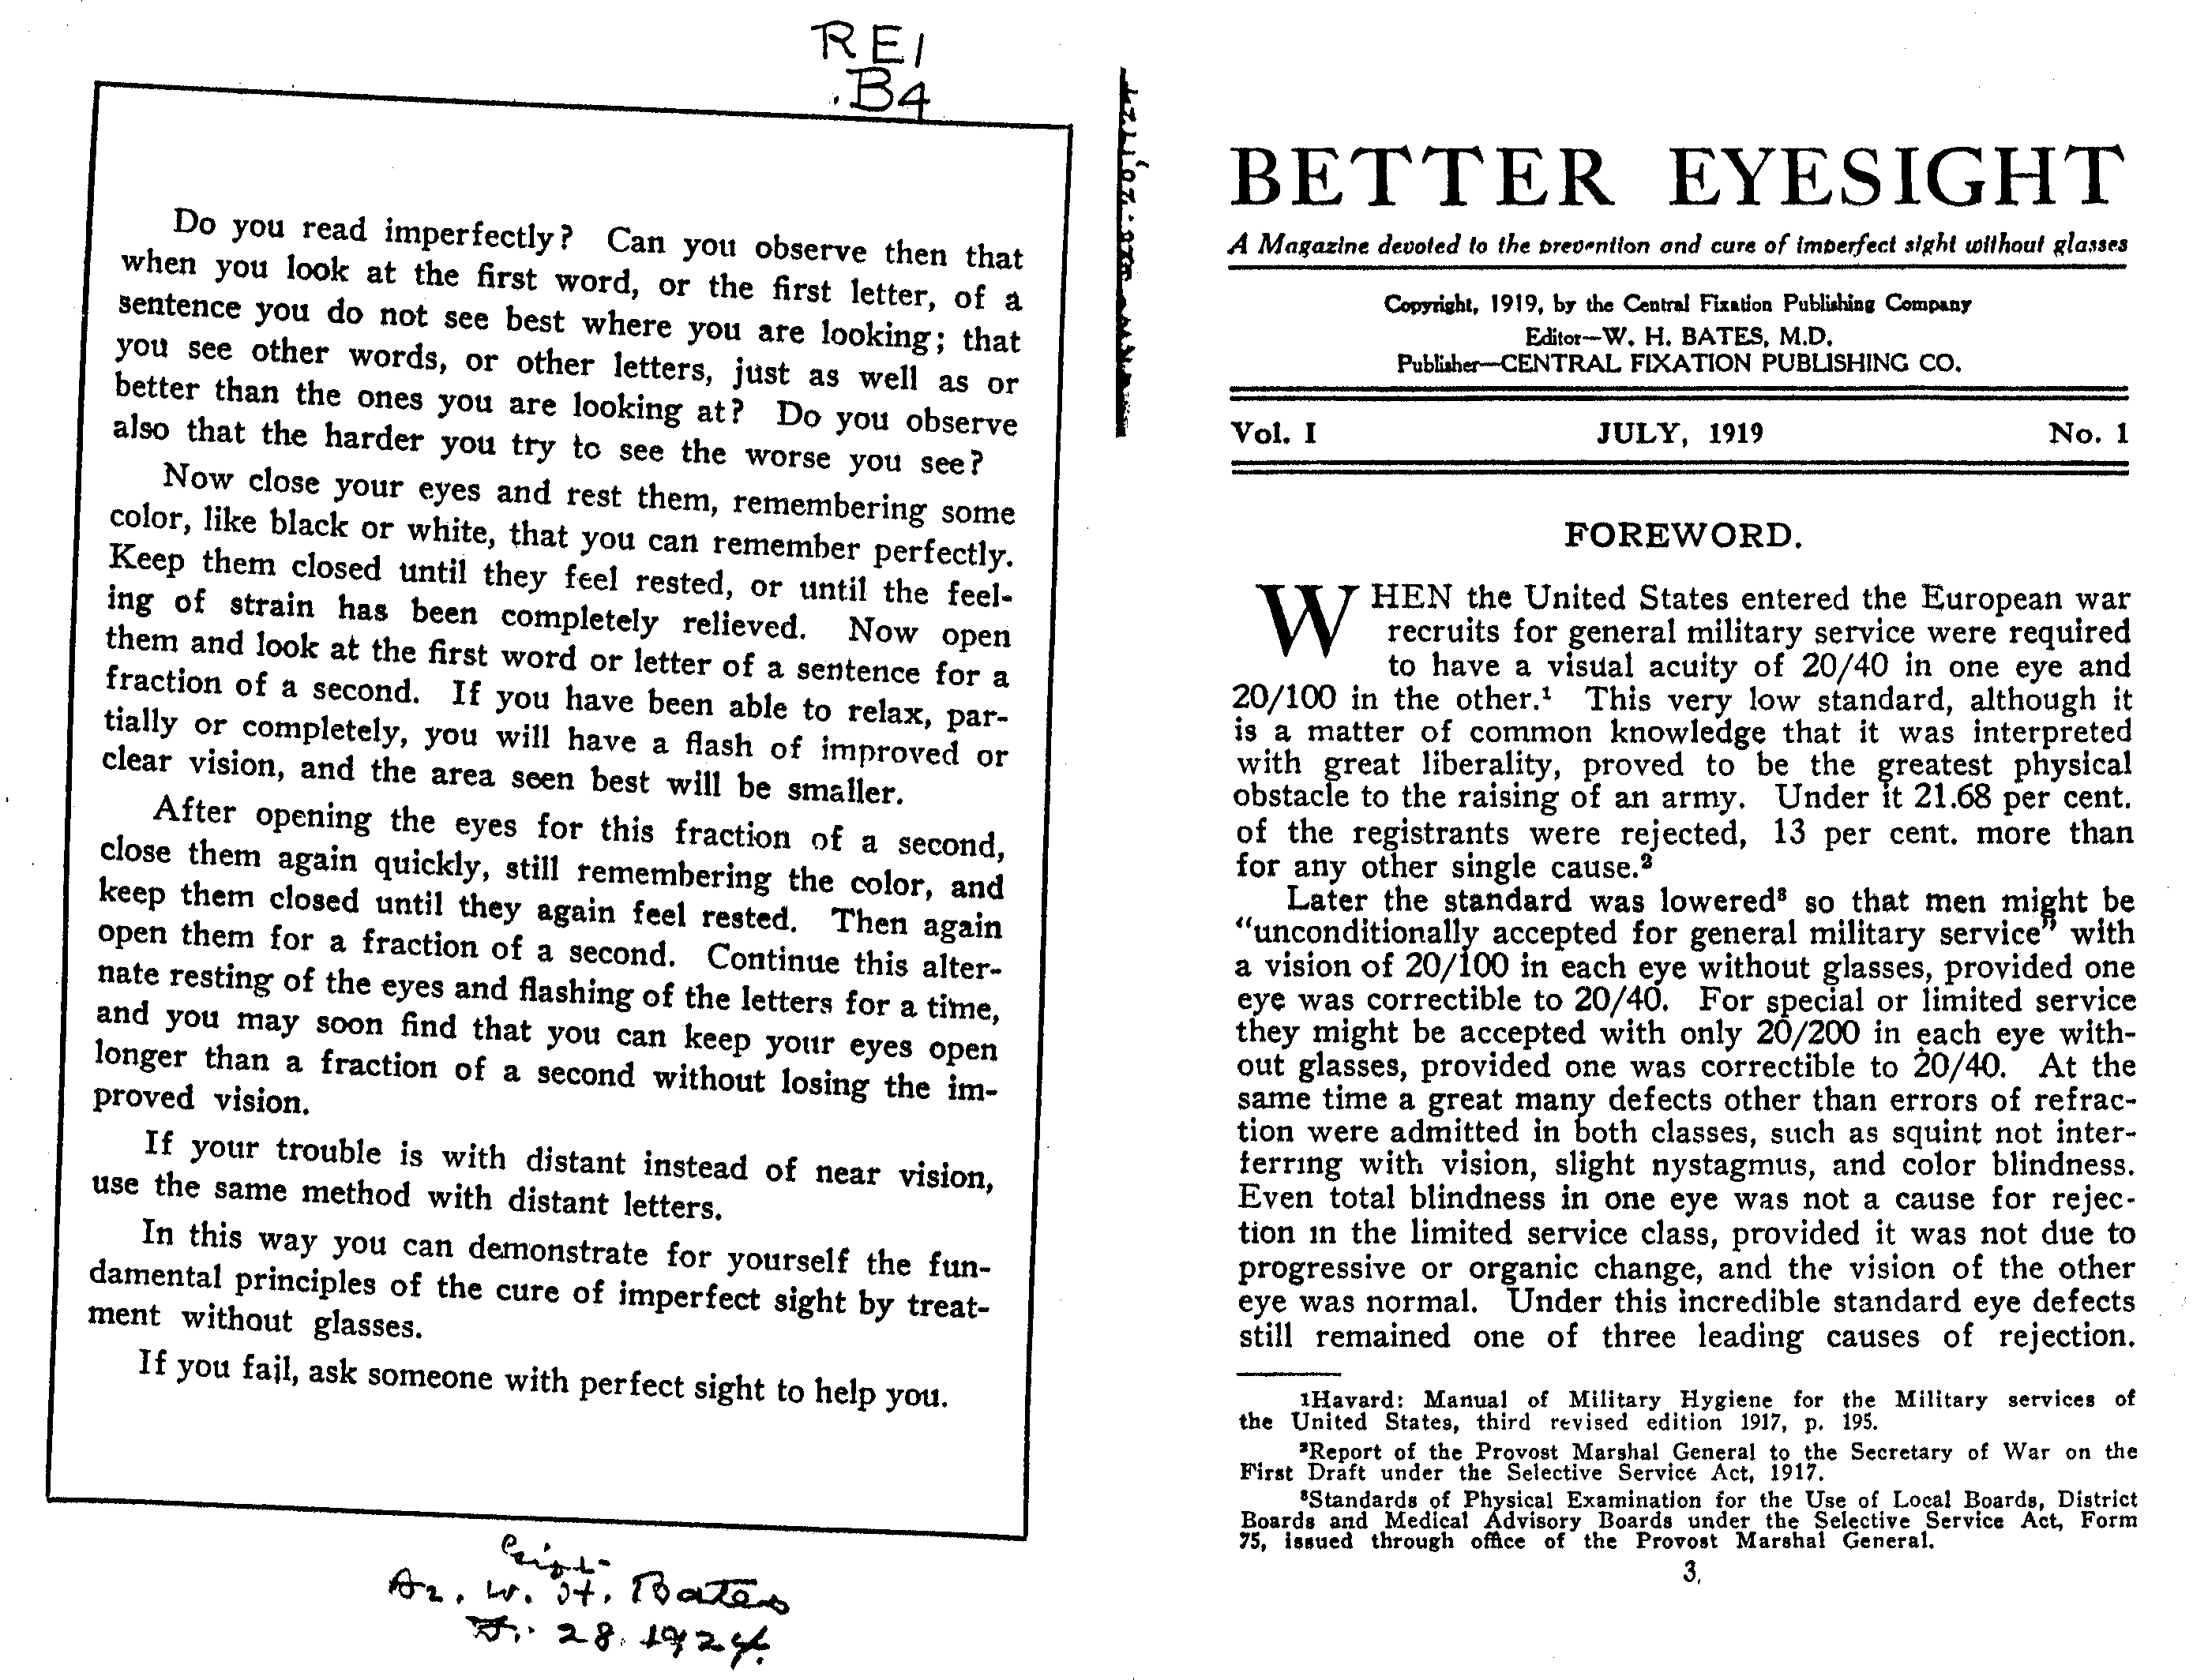 Better Eyesight Magazine, July, 1919. Print Reading in Picture